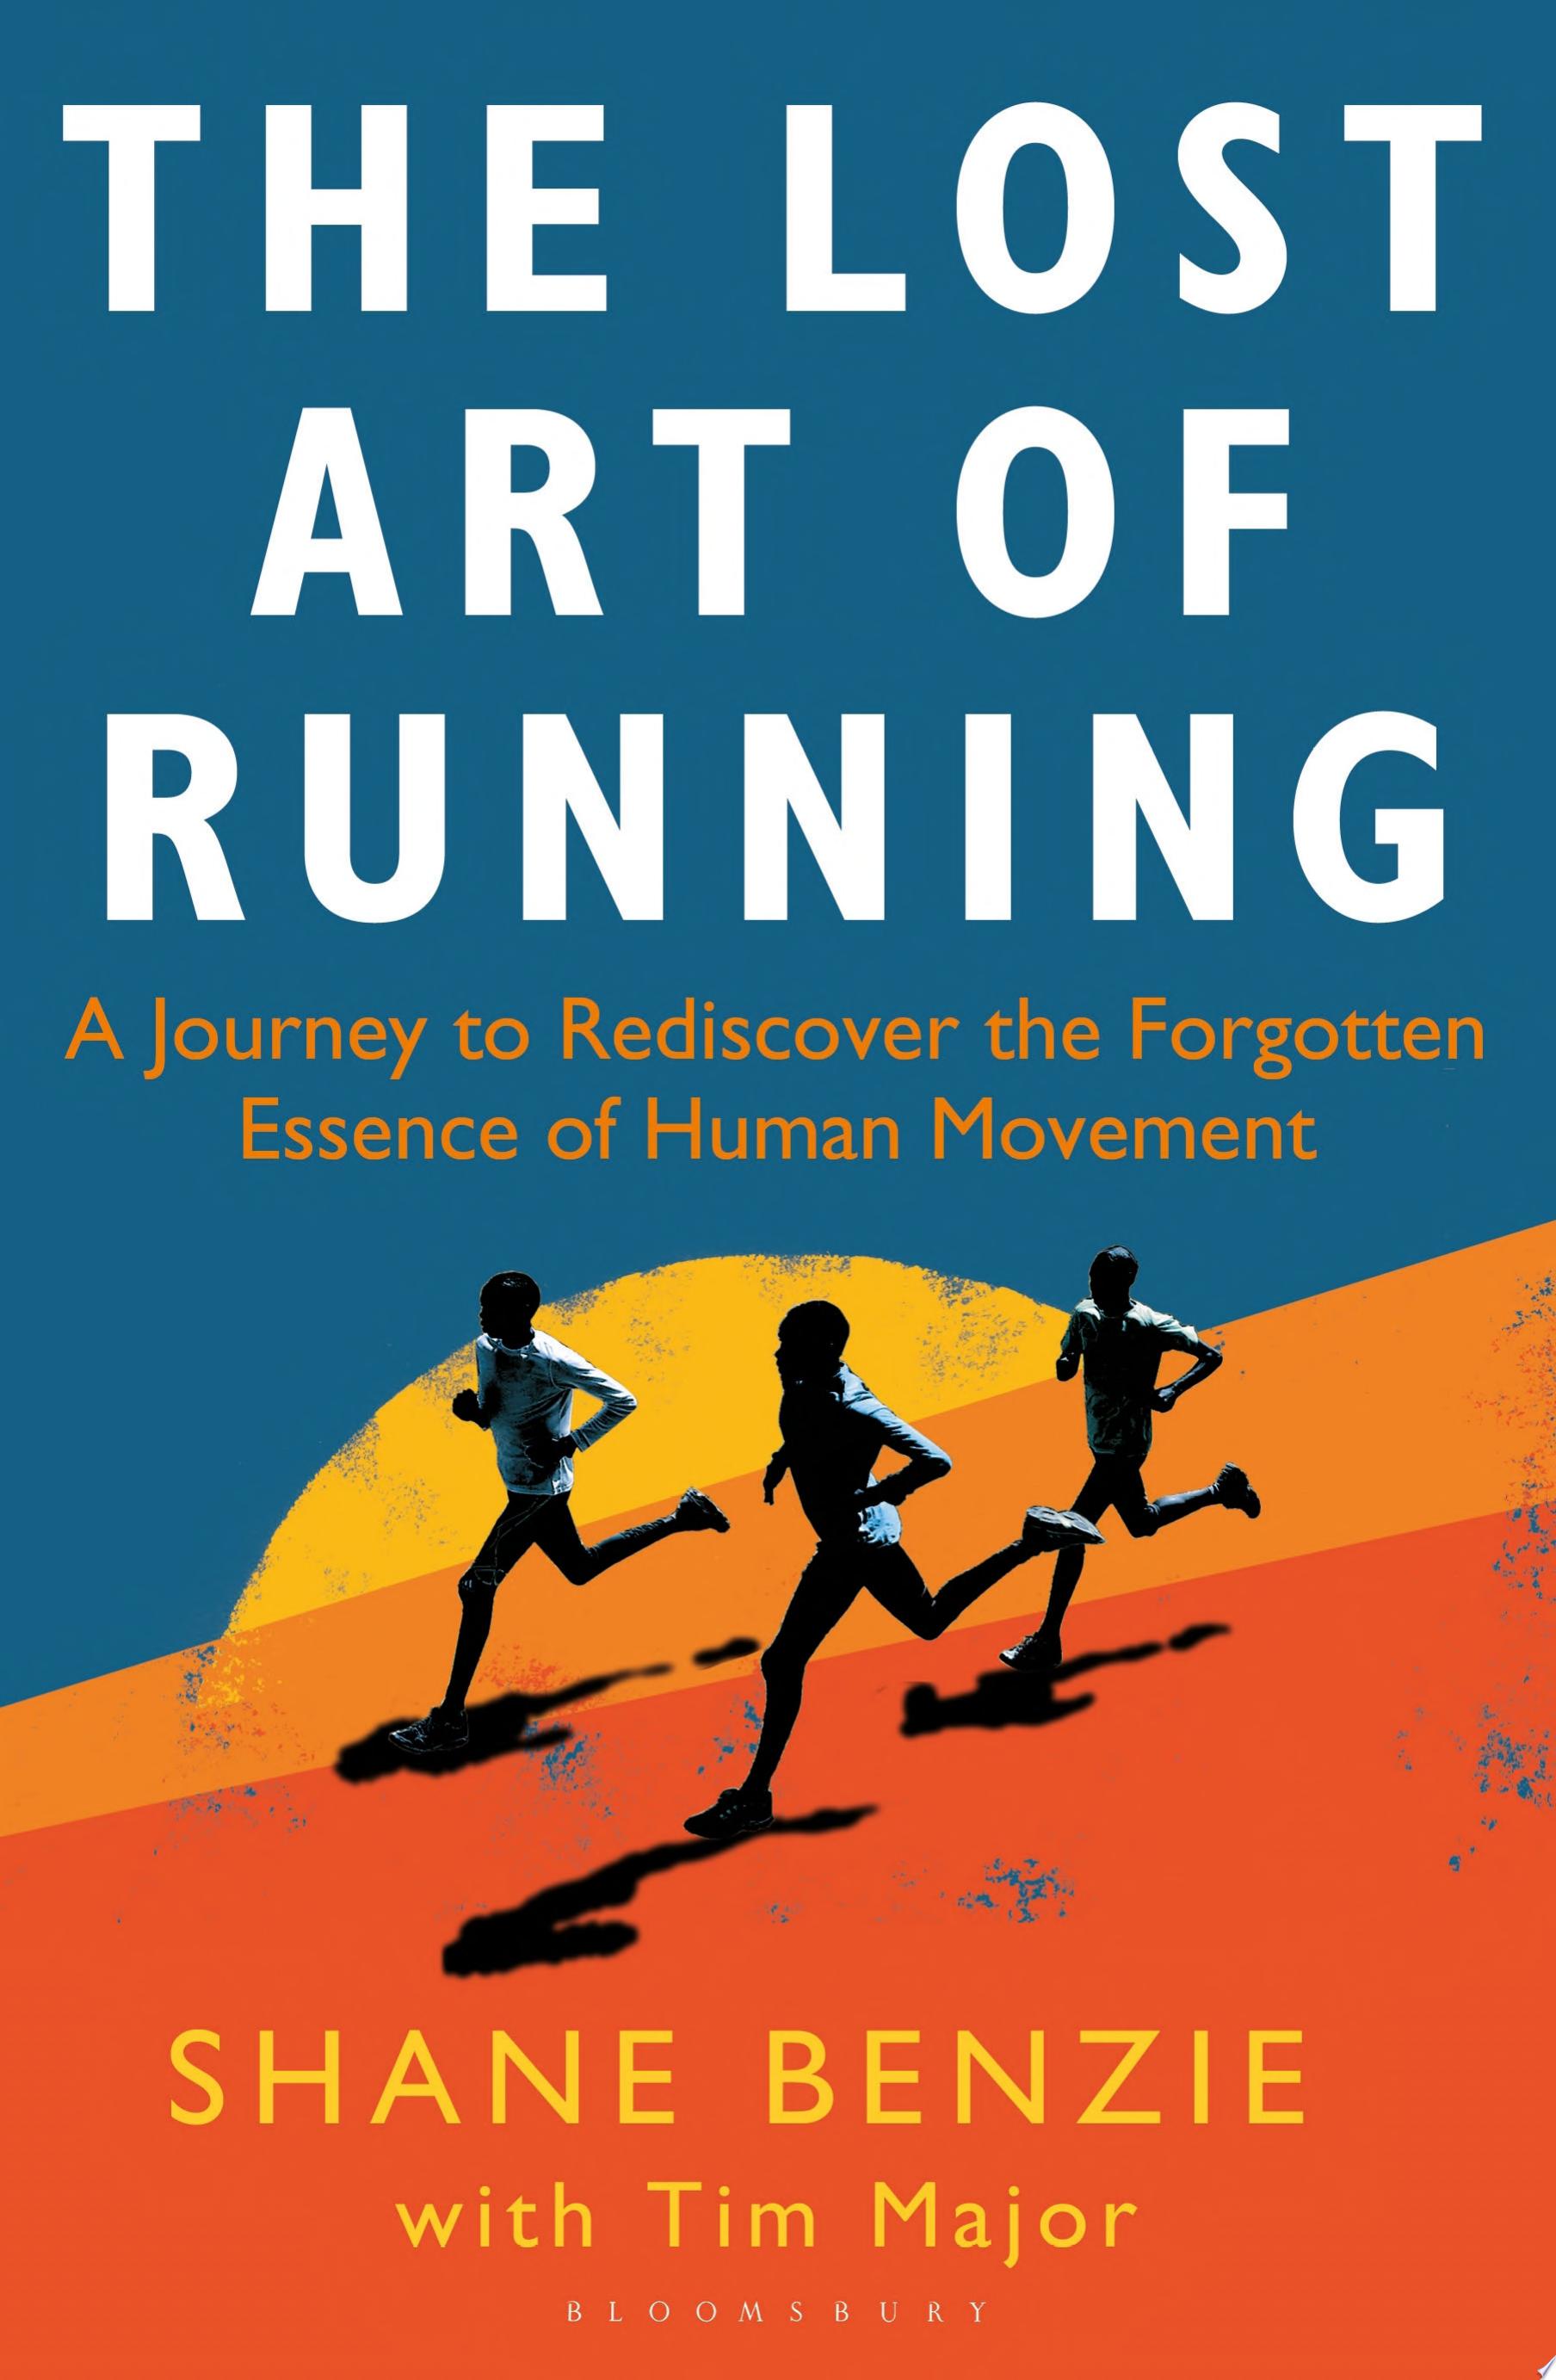 Image for "The Lost Art of Running"